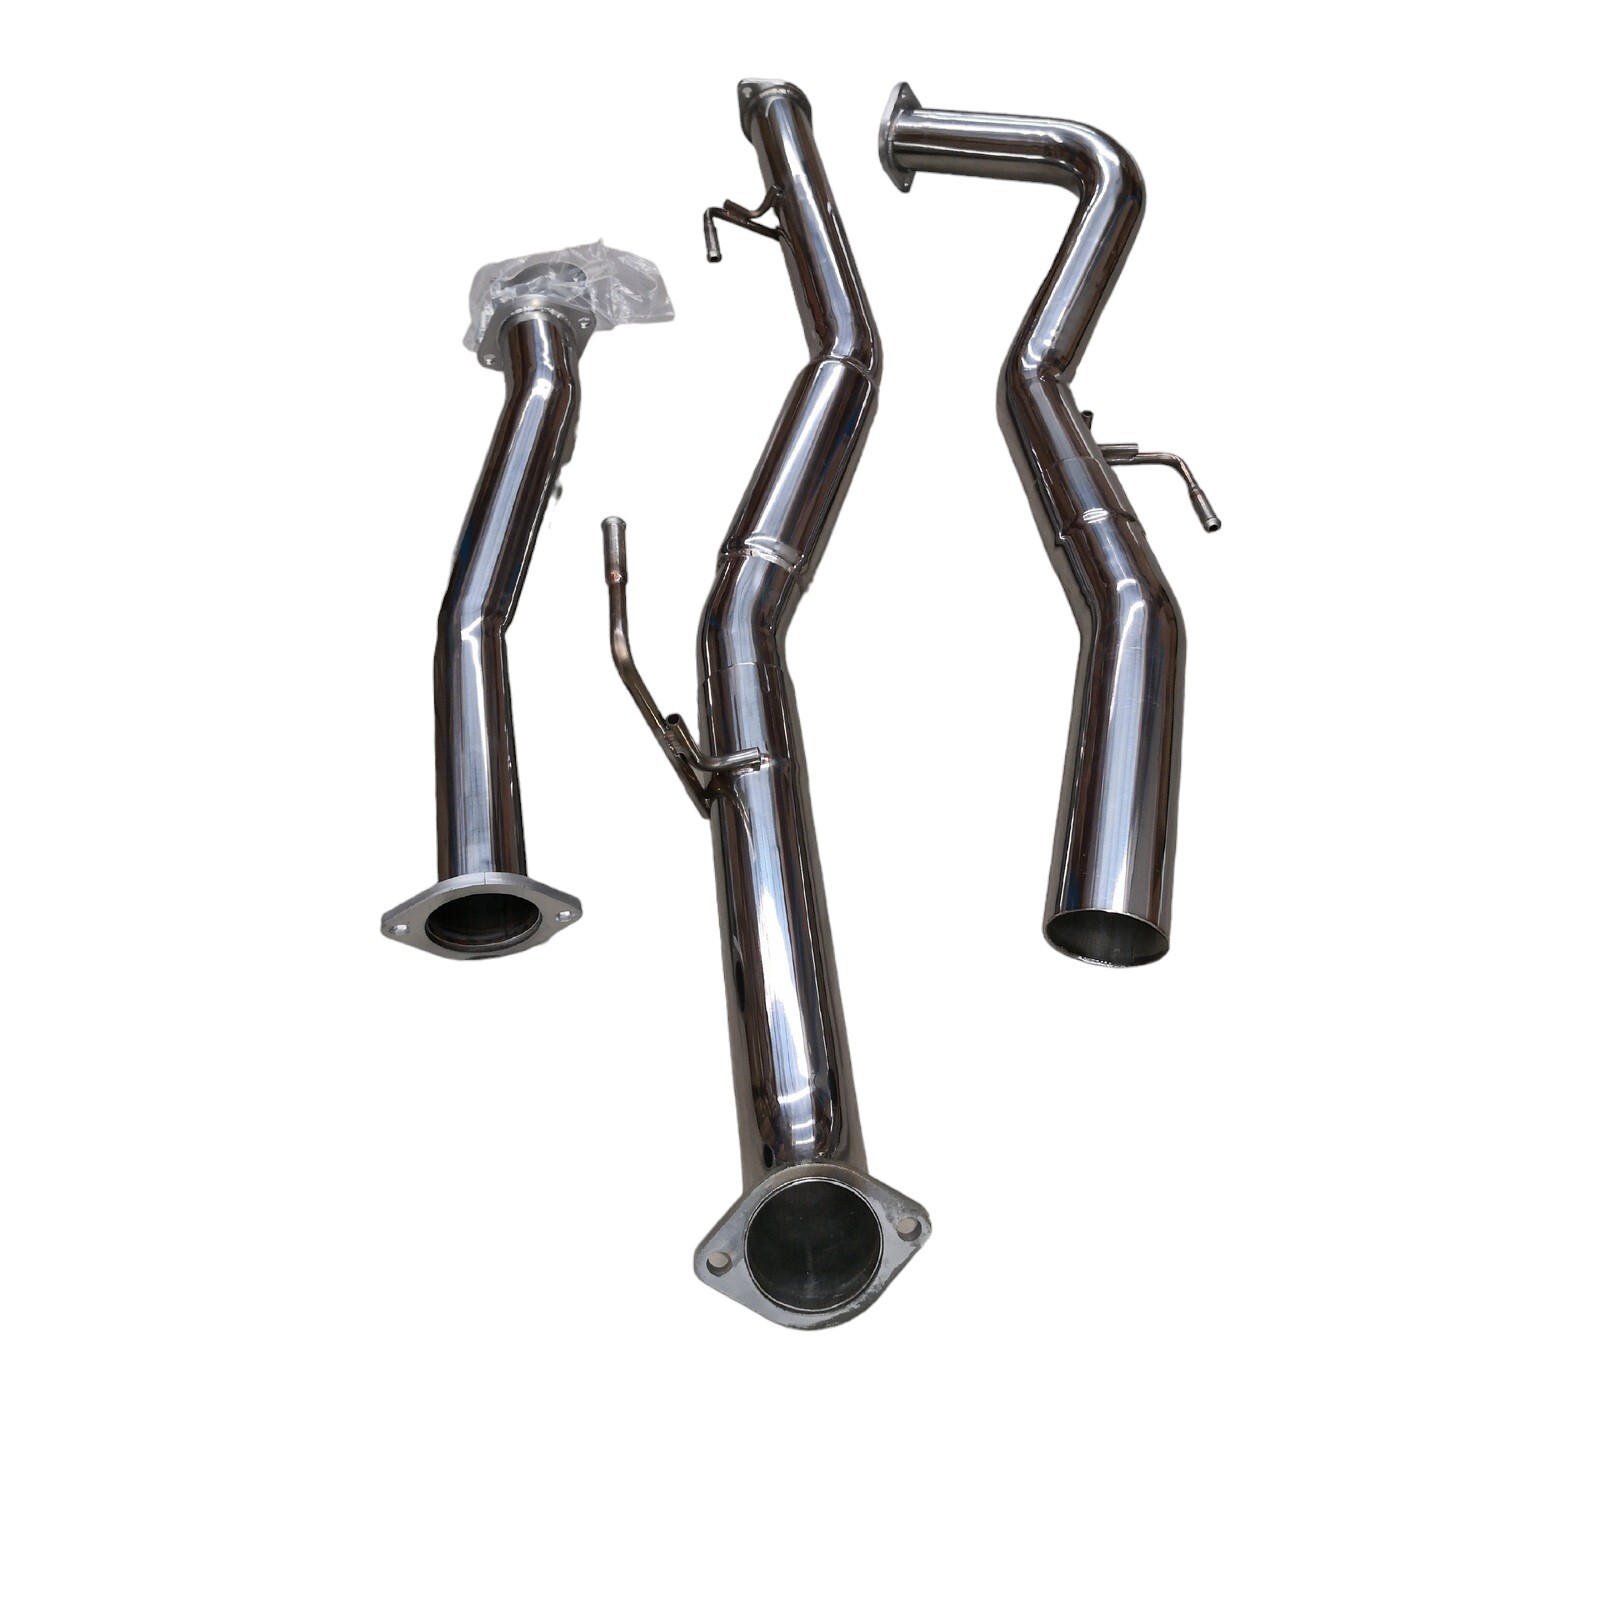 NISSAN NAVARA NP300 D23 DPF BACK EXHAUST STAINLESS